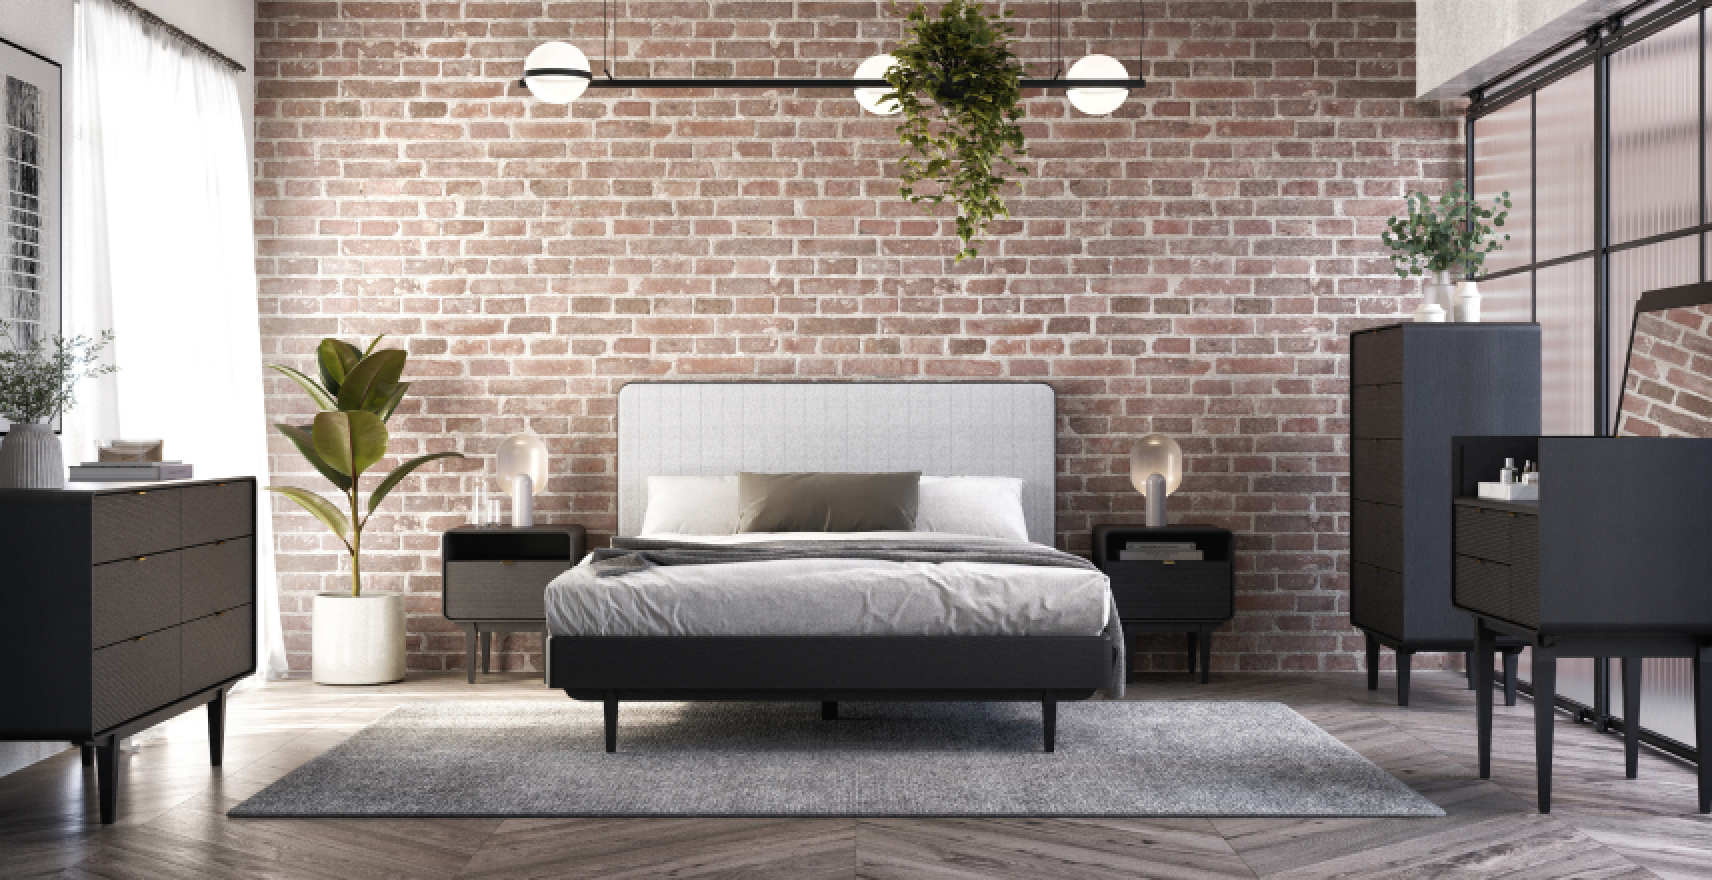 Your guide to an industrial bedroom style